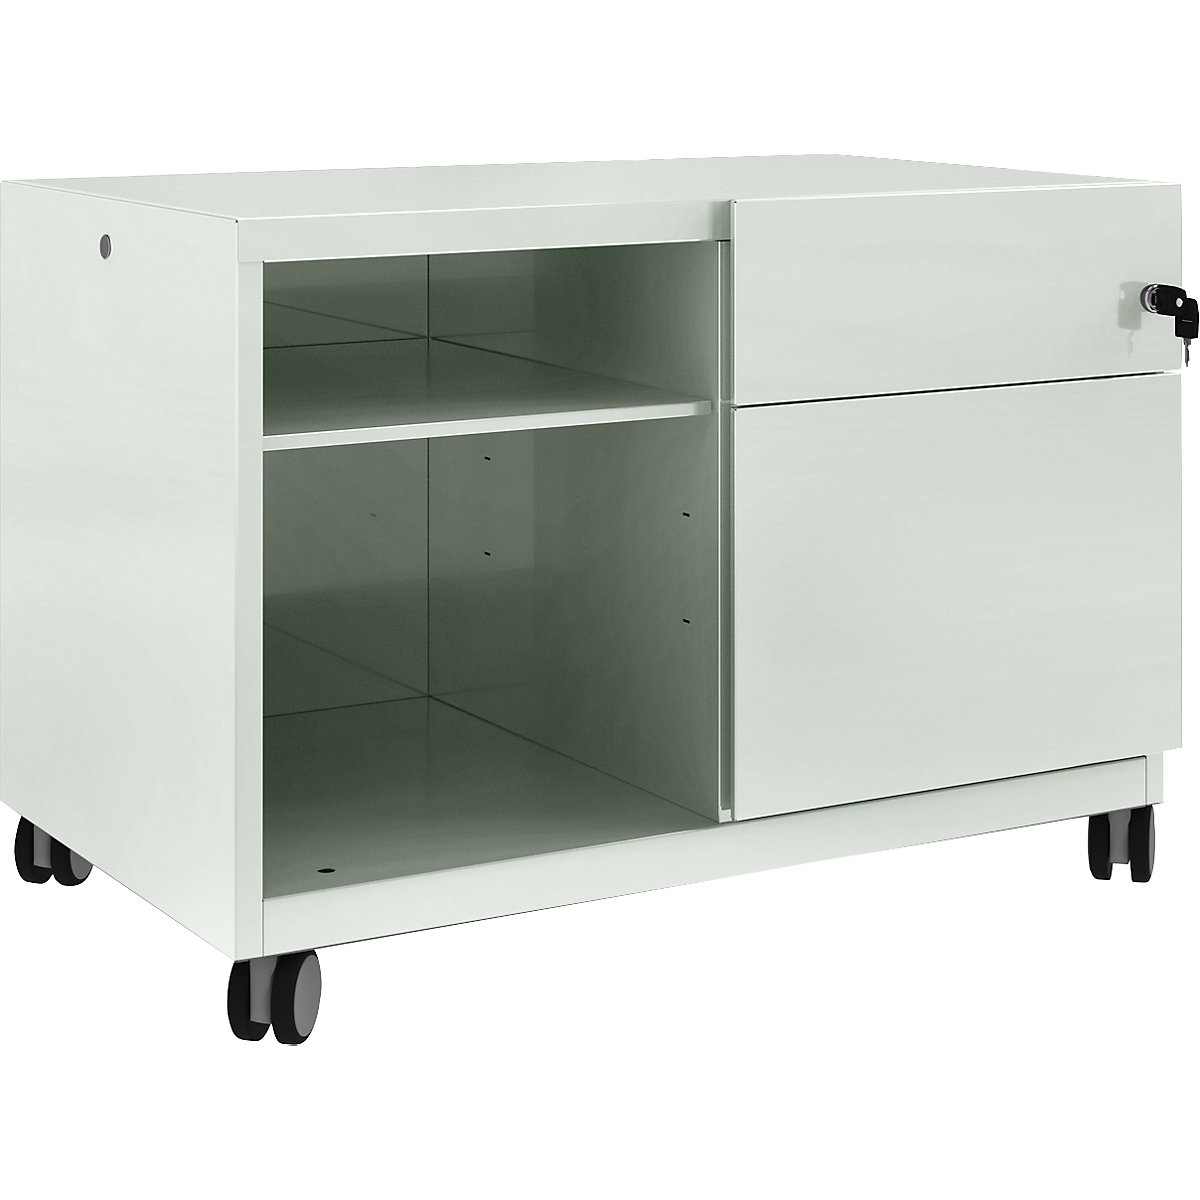 Note™ CADDY, HxBxT 563 x 800 x 490 mm – BISLEY, 1 universal drawer and suspension file drawer on the right, portland-25